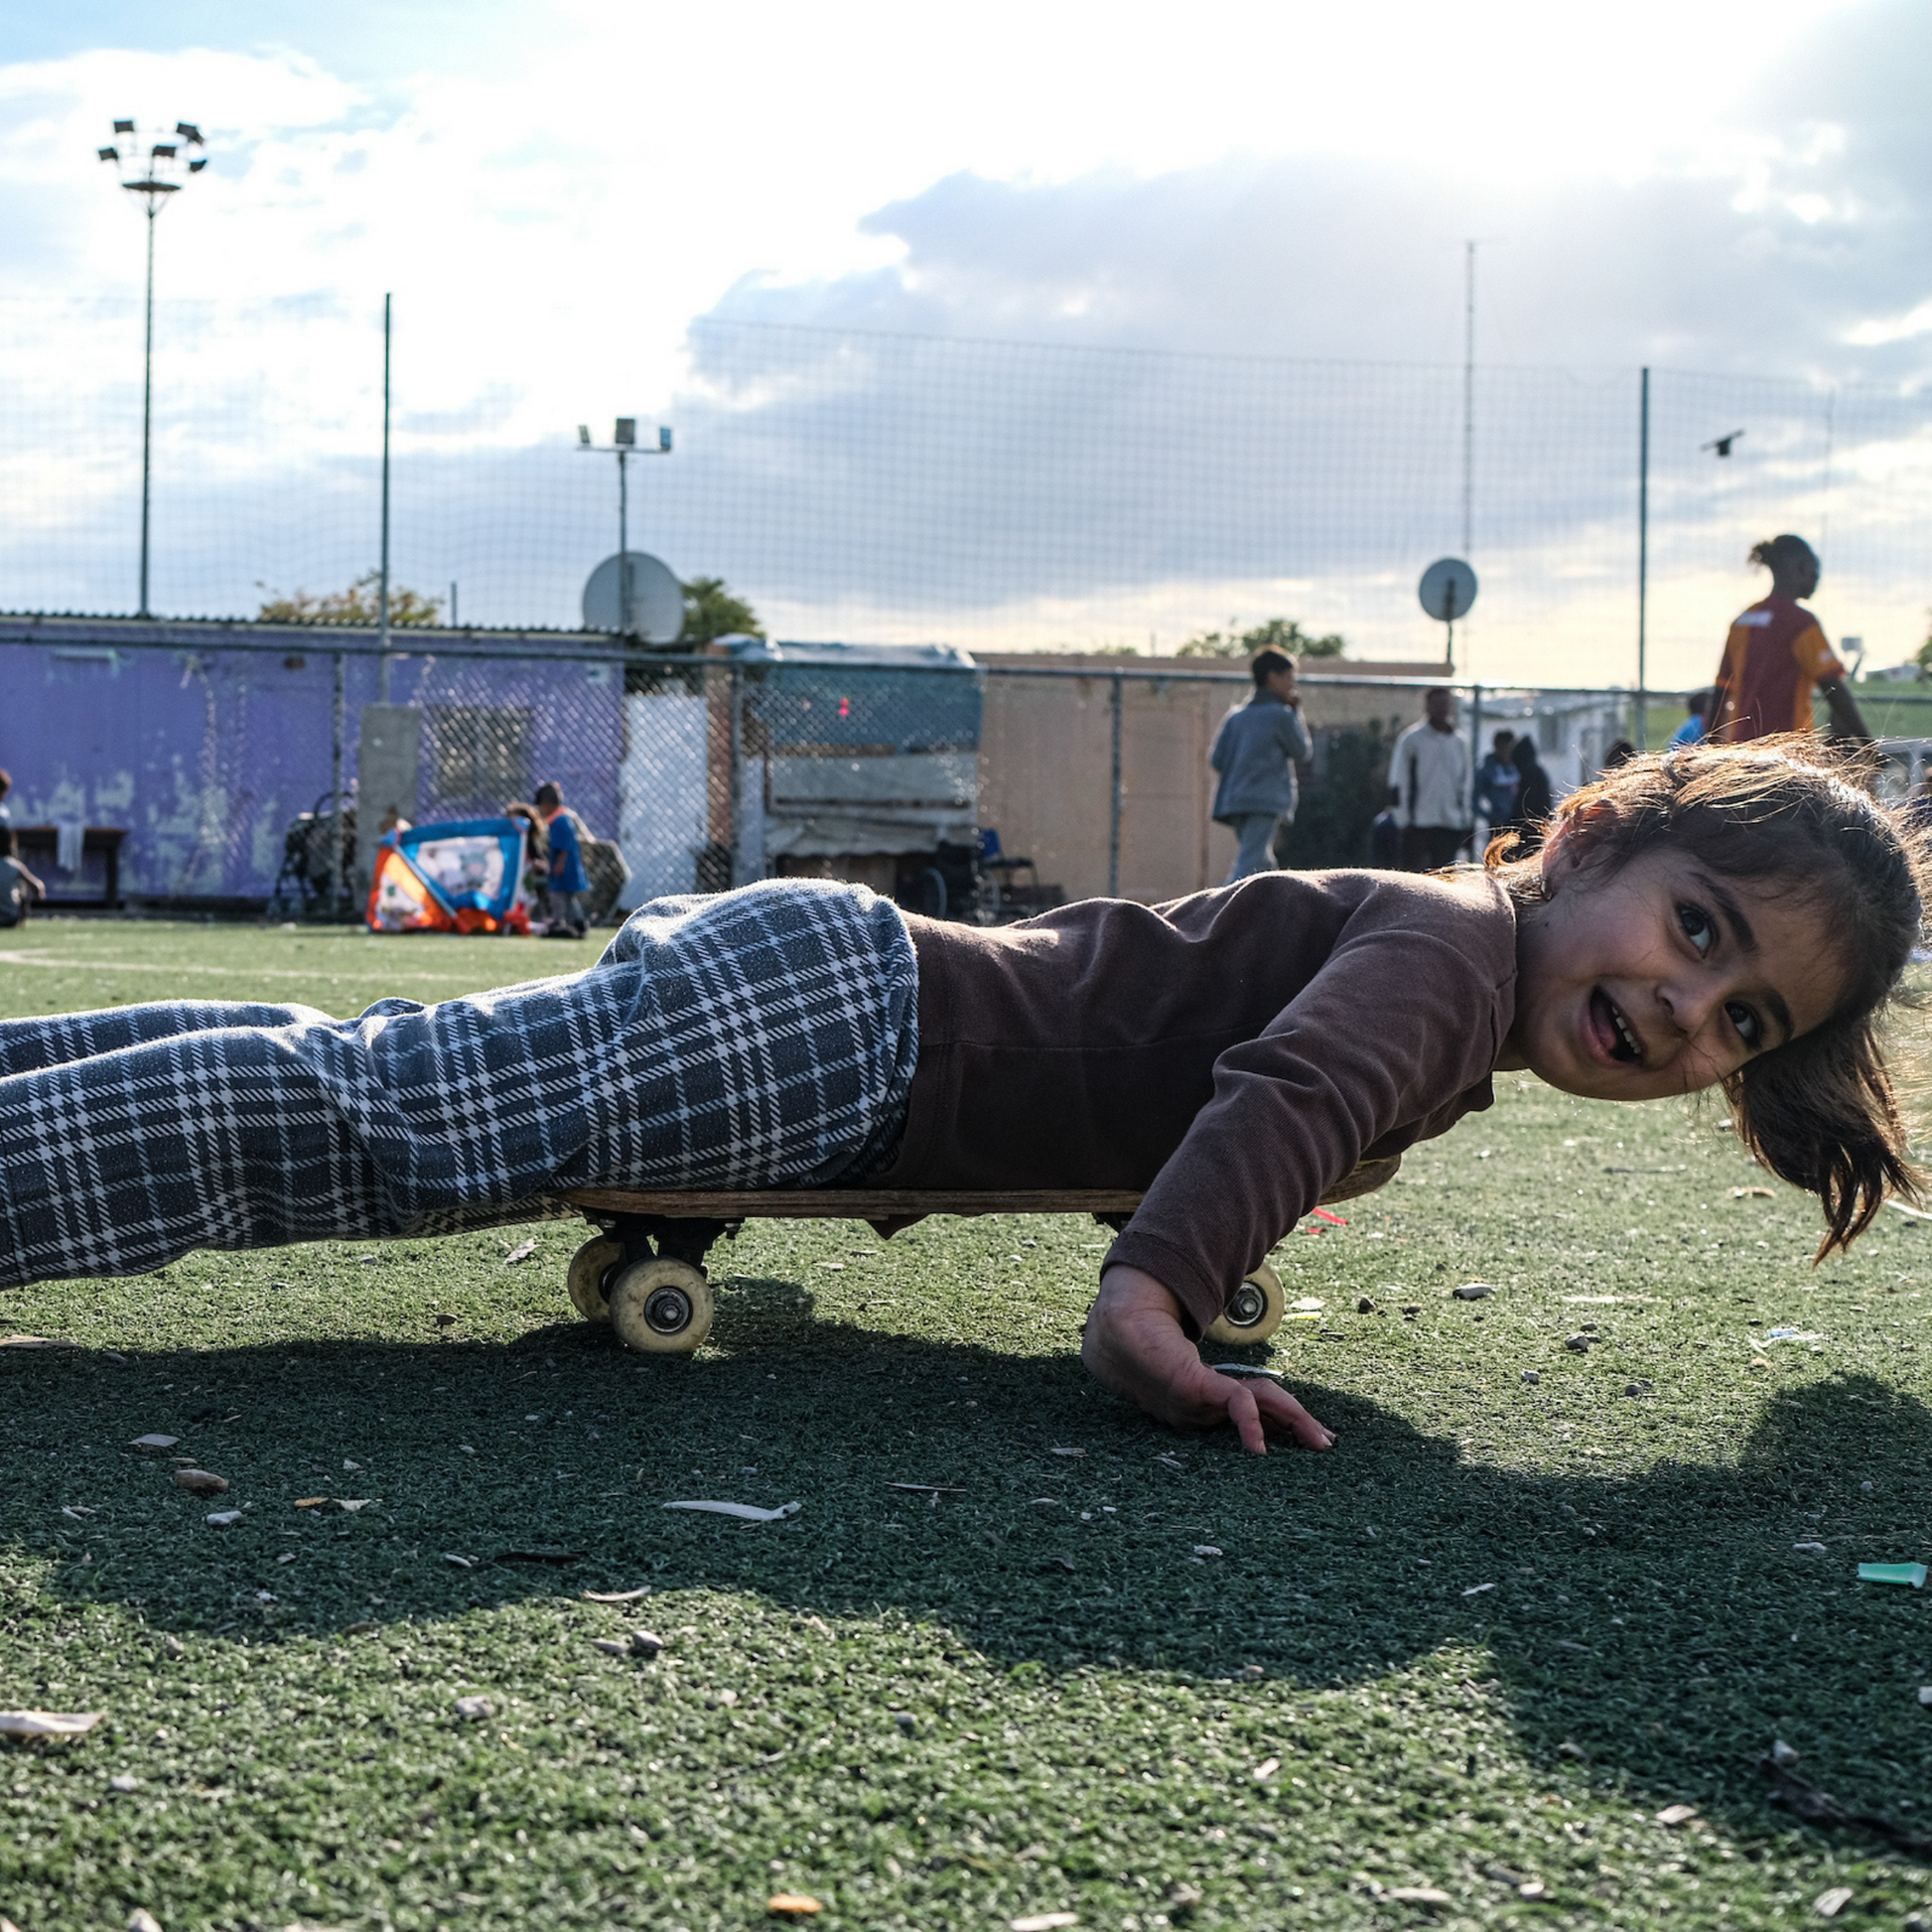 The image shows a young girl being playing and laying on a child's skating board, in a playing space of a refugee camp. In the background there are makeshift accommodations and a few other adult refugees.